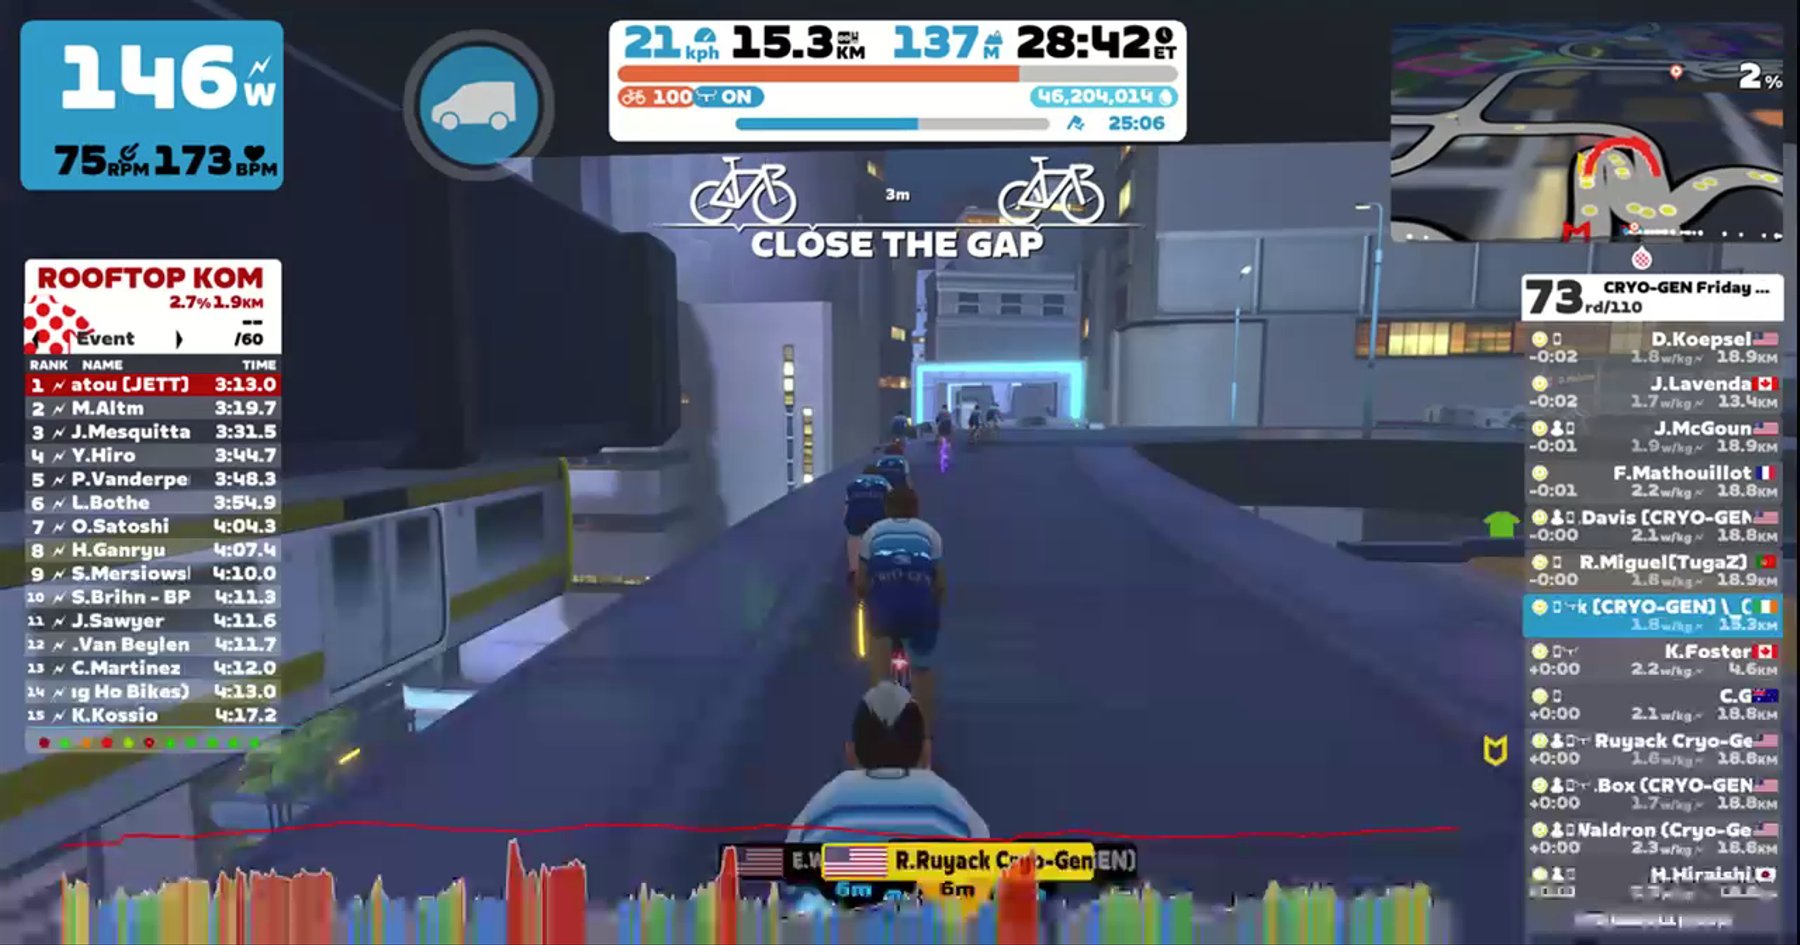 Zwift - Group Ride: CRYO-GEN Friday Fun Social Ride (D) (D) on Neokyo All-Nighter in Makuri Islands- Feel free to join our Zwift Club, Facebook, or Strava group any time for for more info go to www.cryogen.team